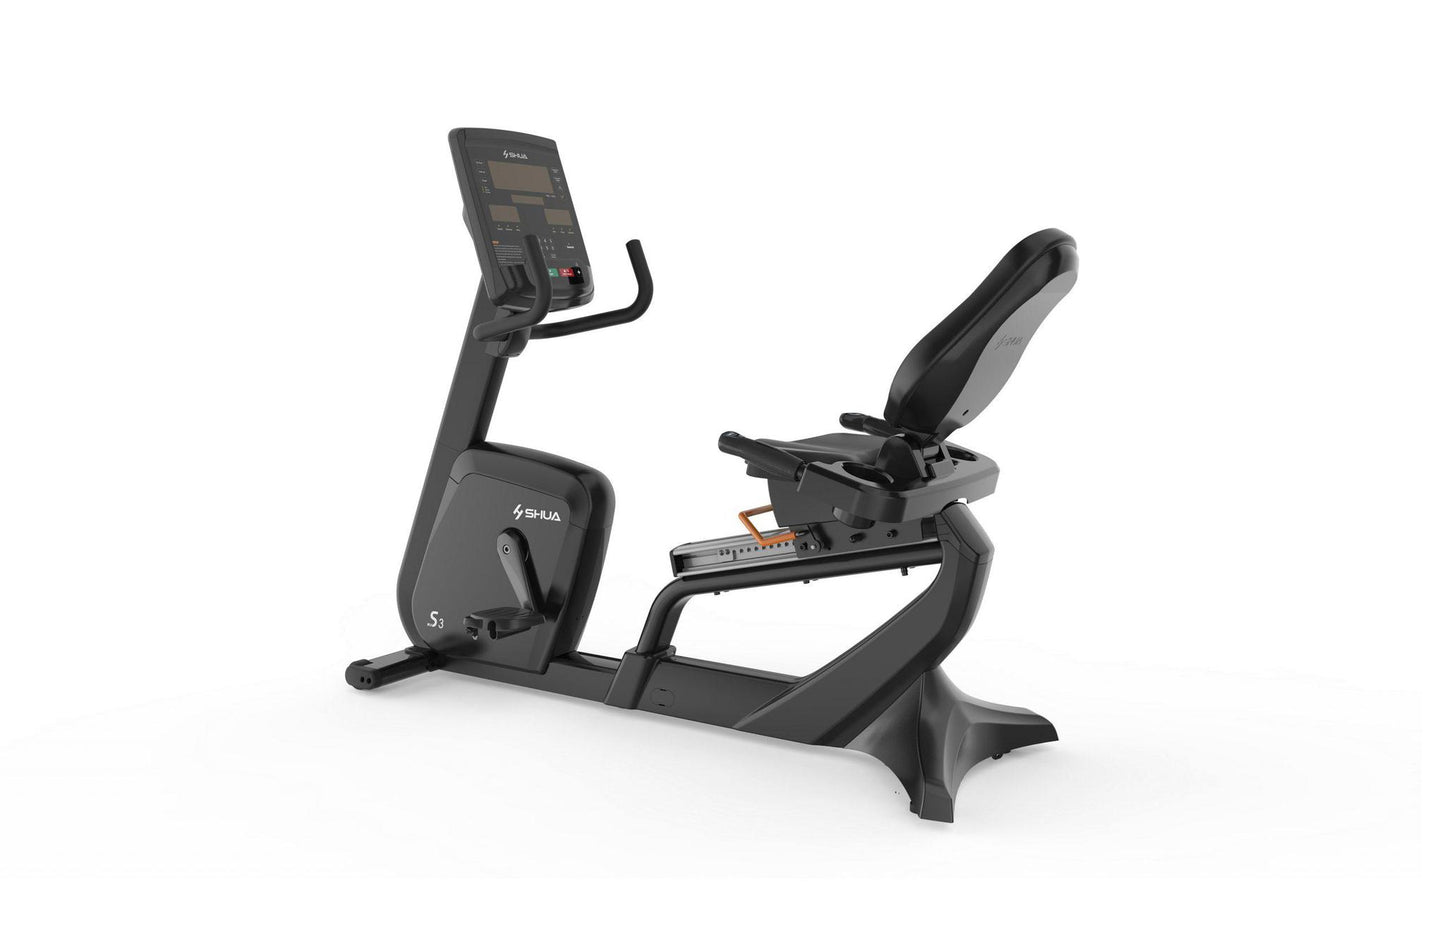 Muscle D Commercial Recumbent Bike with LED Screen